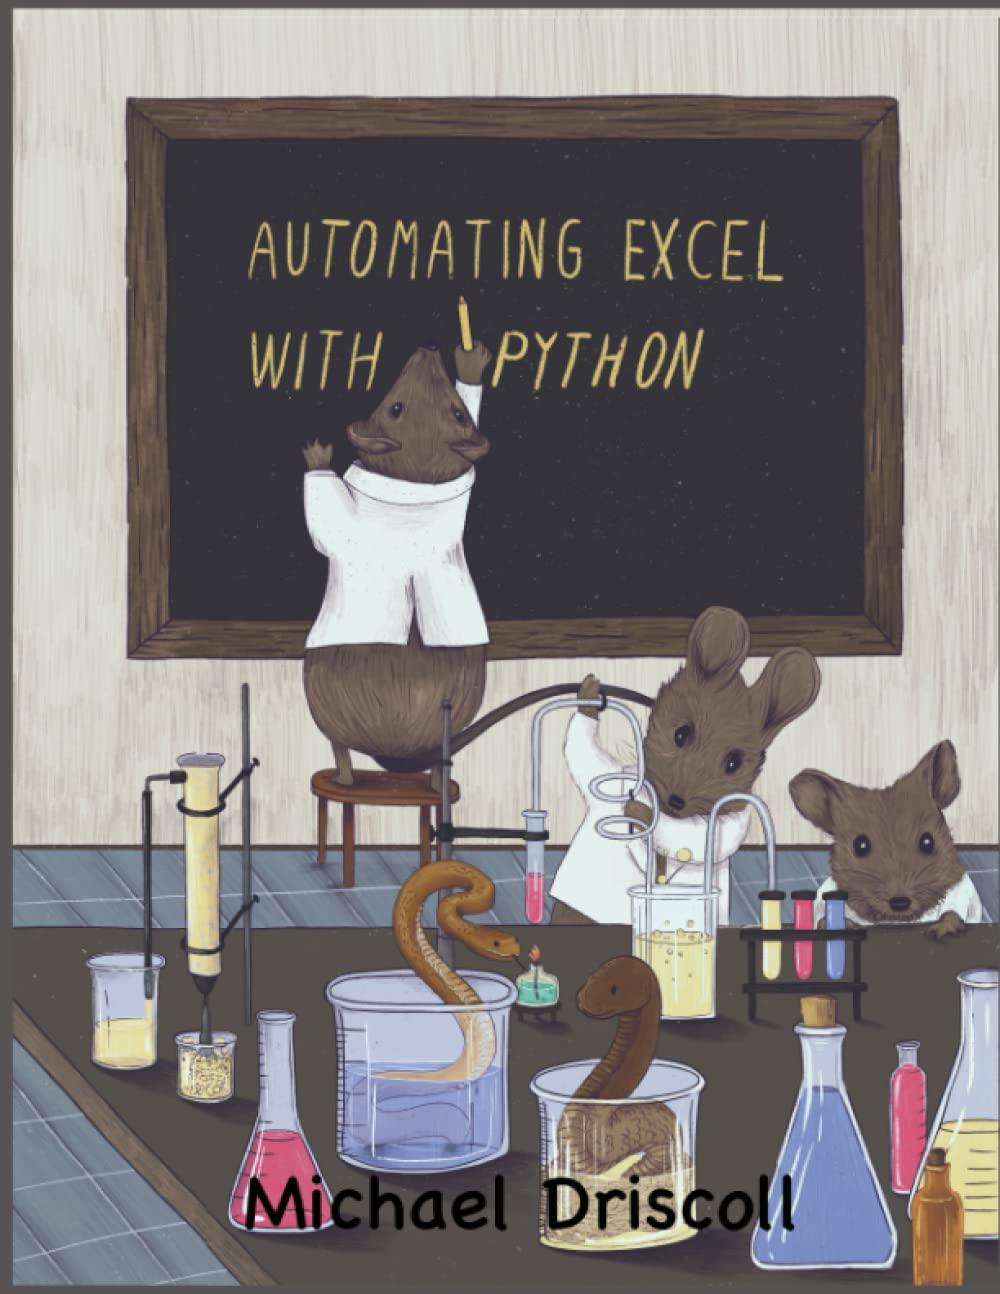 automating excel with python 1st edition michael driscoll b09m5551w2, 979-8752004537